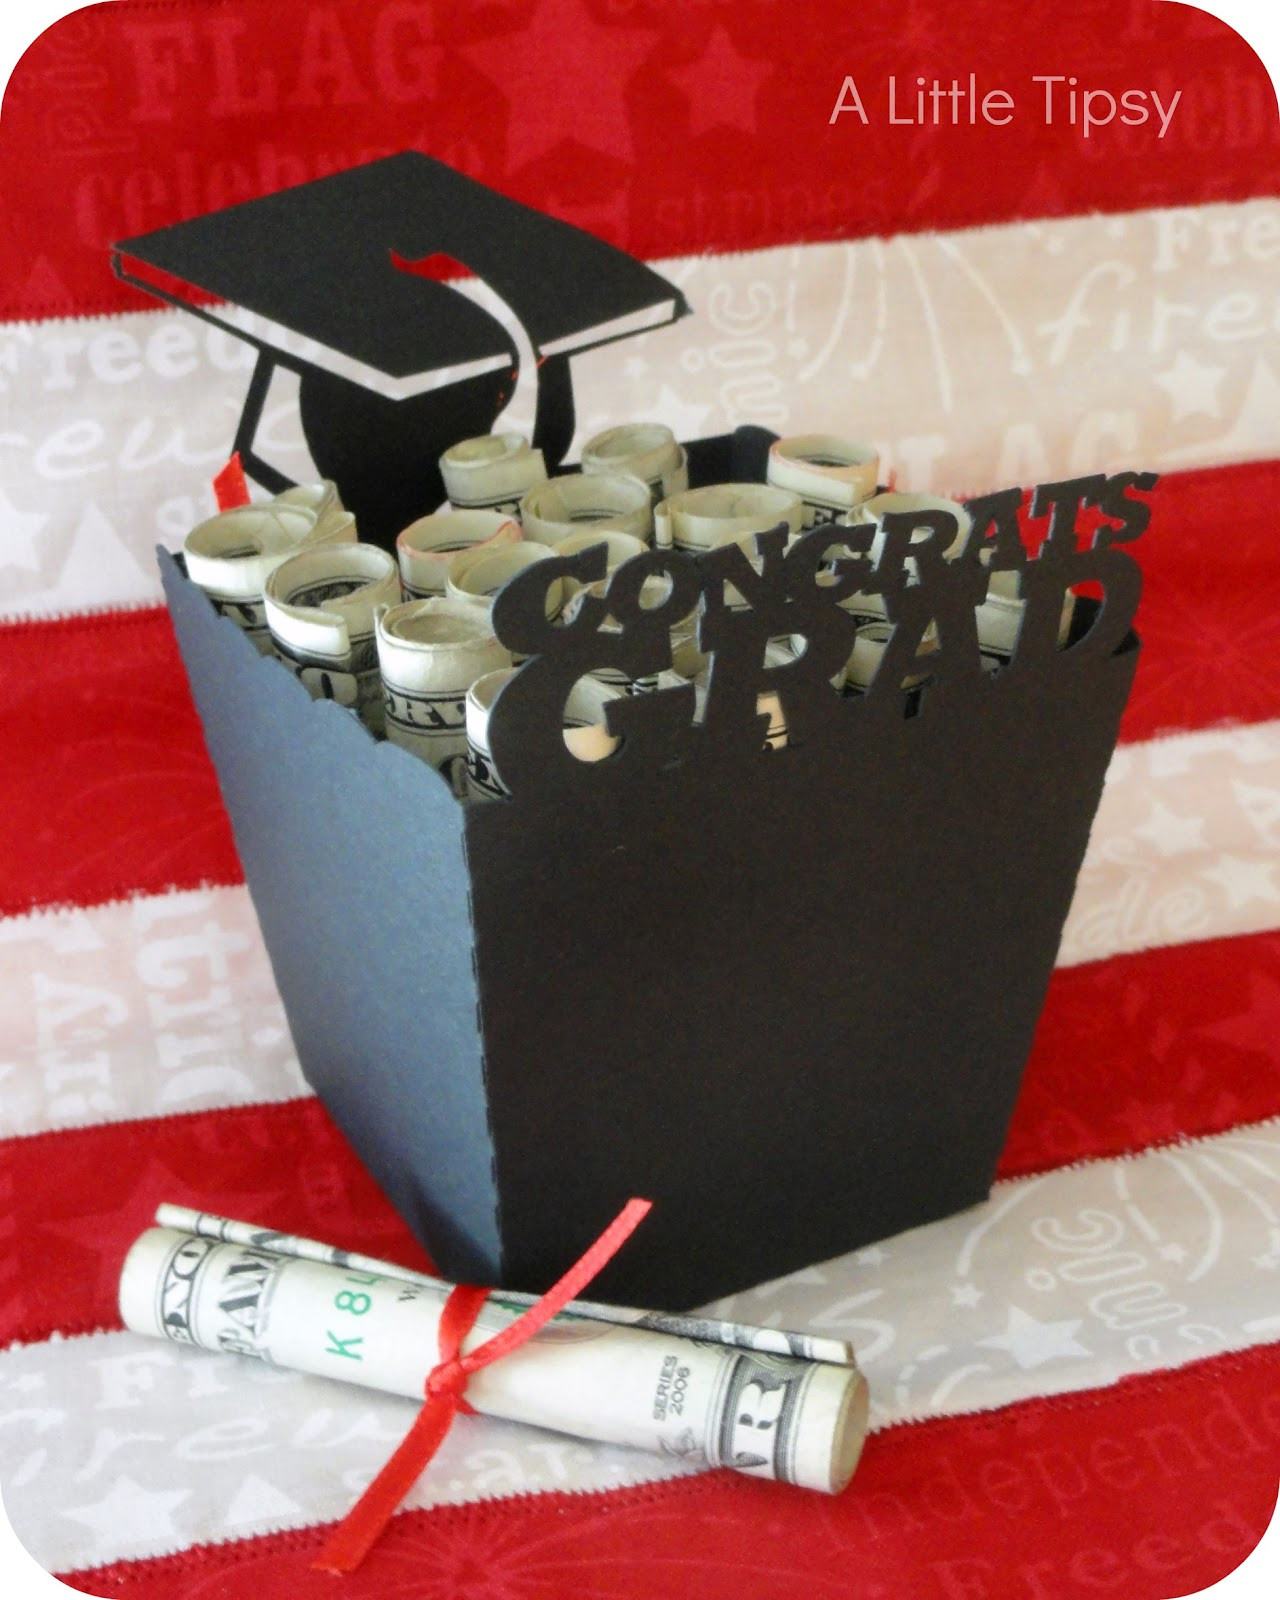 Masters Graduation Gift Ideas For Her
 Last Minute Graduation Gift A Little Tipsy